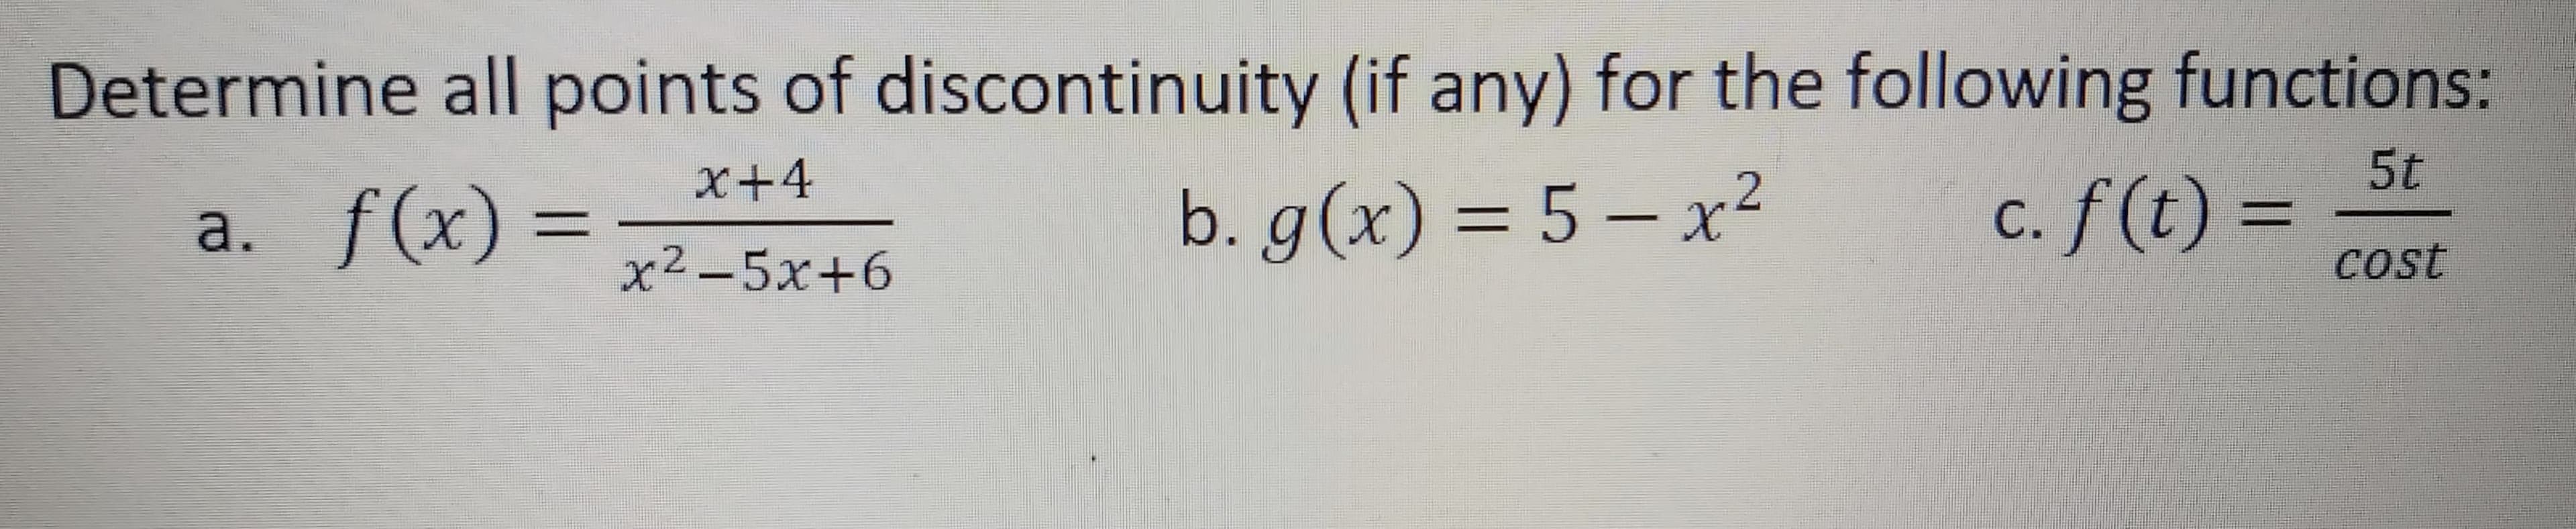 Determine all points of discontinuity (if any) for the following functions:
5t
x+4
a. f(x) =
b. g(x) = 5 – x?
c. f(t) =
x²-5x+6
Cost
